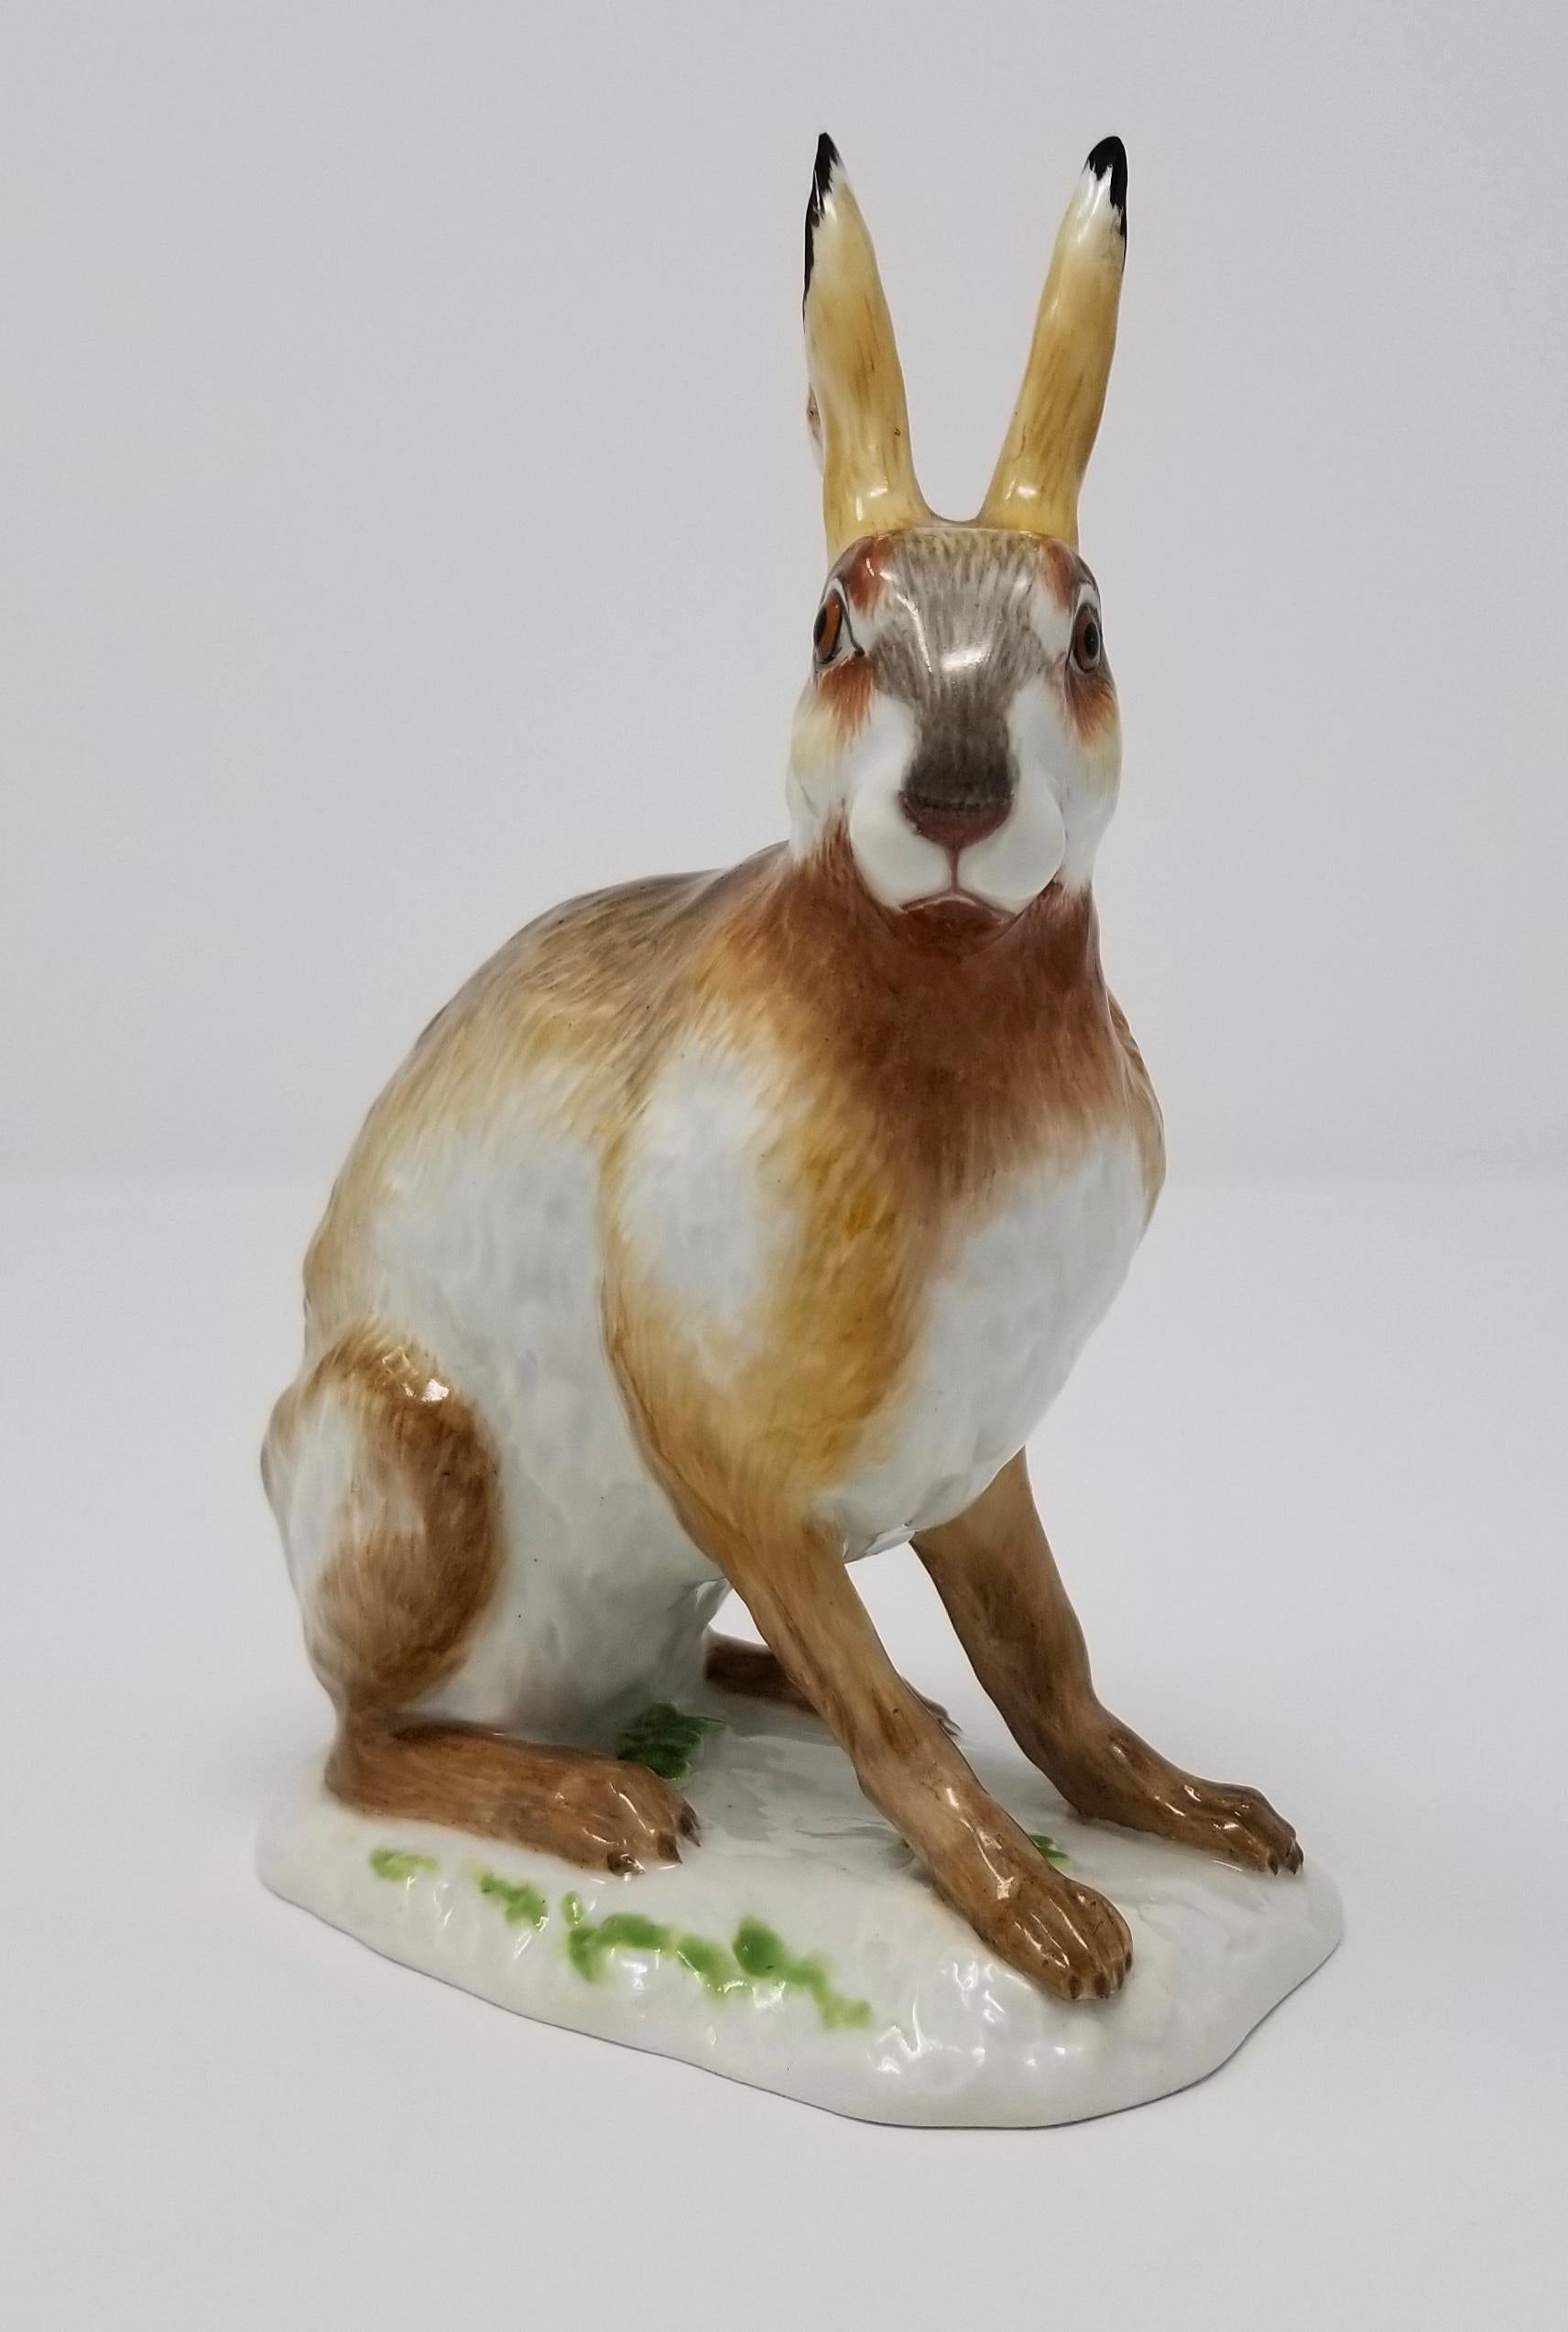 A fine Meissen Porcelain rabbit figure, after a model by J.J. Kandler; with blue double-crossed swords underglaze mark including a blue dot between swords, Indicative of the Pfeiffer period. This truly realistic figure of a naturalistic rabbit